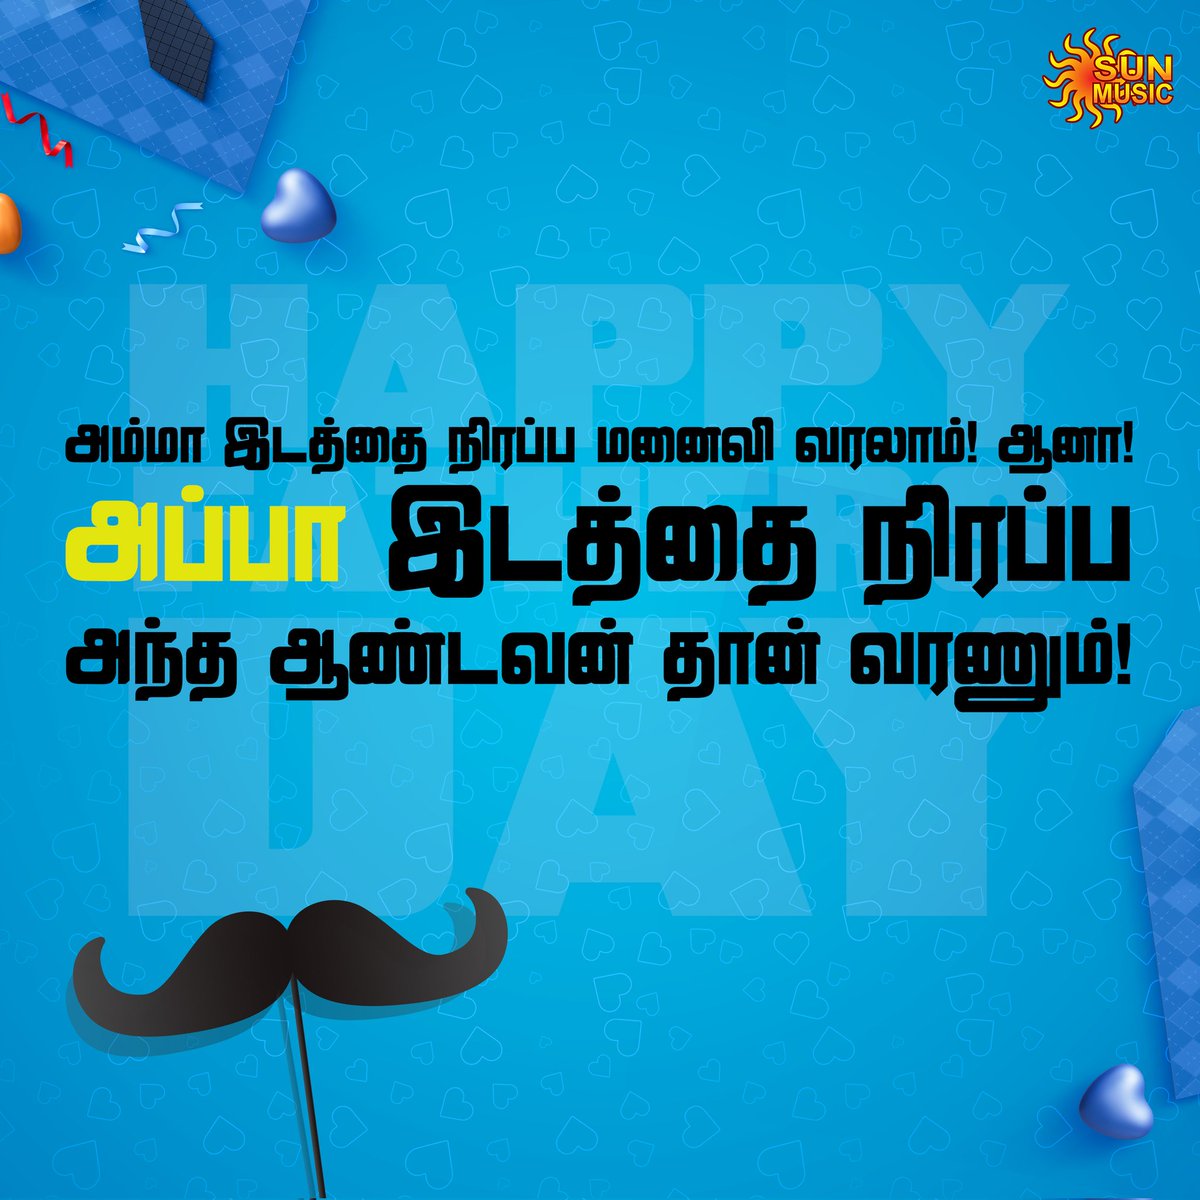 Quote of the day ❤️

#SunMusic #HitSongs #Kollywood #Tamil #Songs #Music #NonStopHits #Appa #HappyFathersDay #FathersDay #FathersDay2023